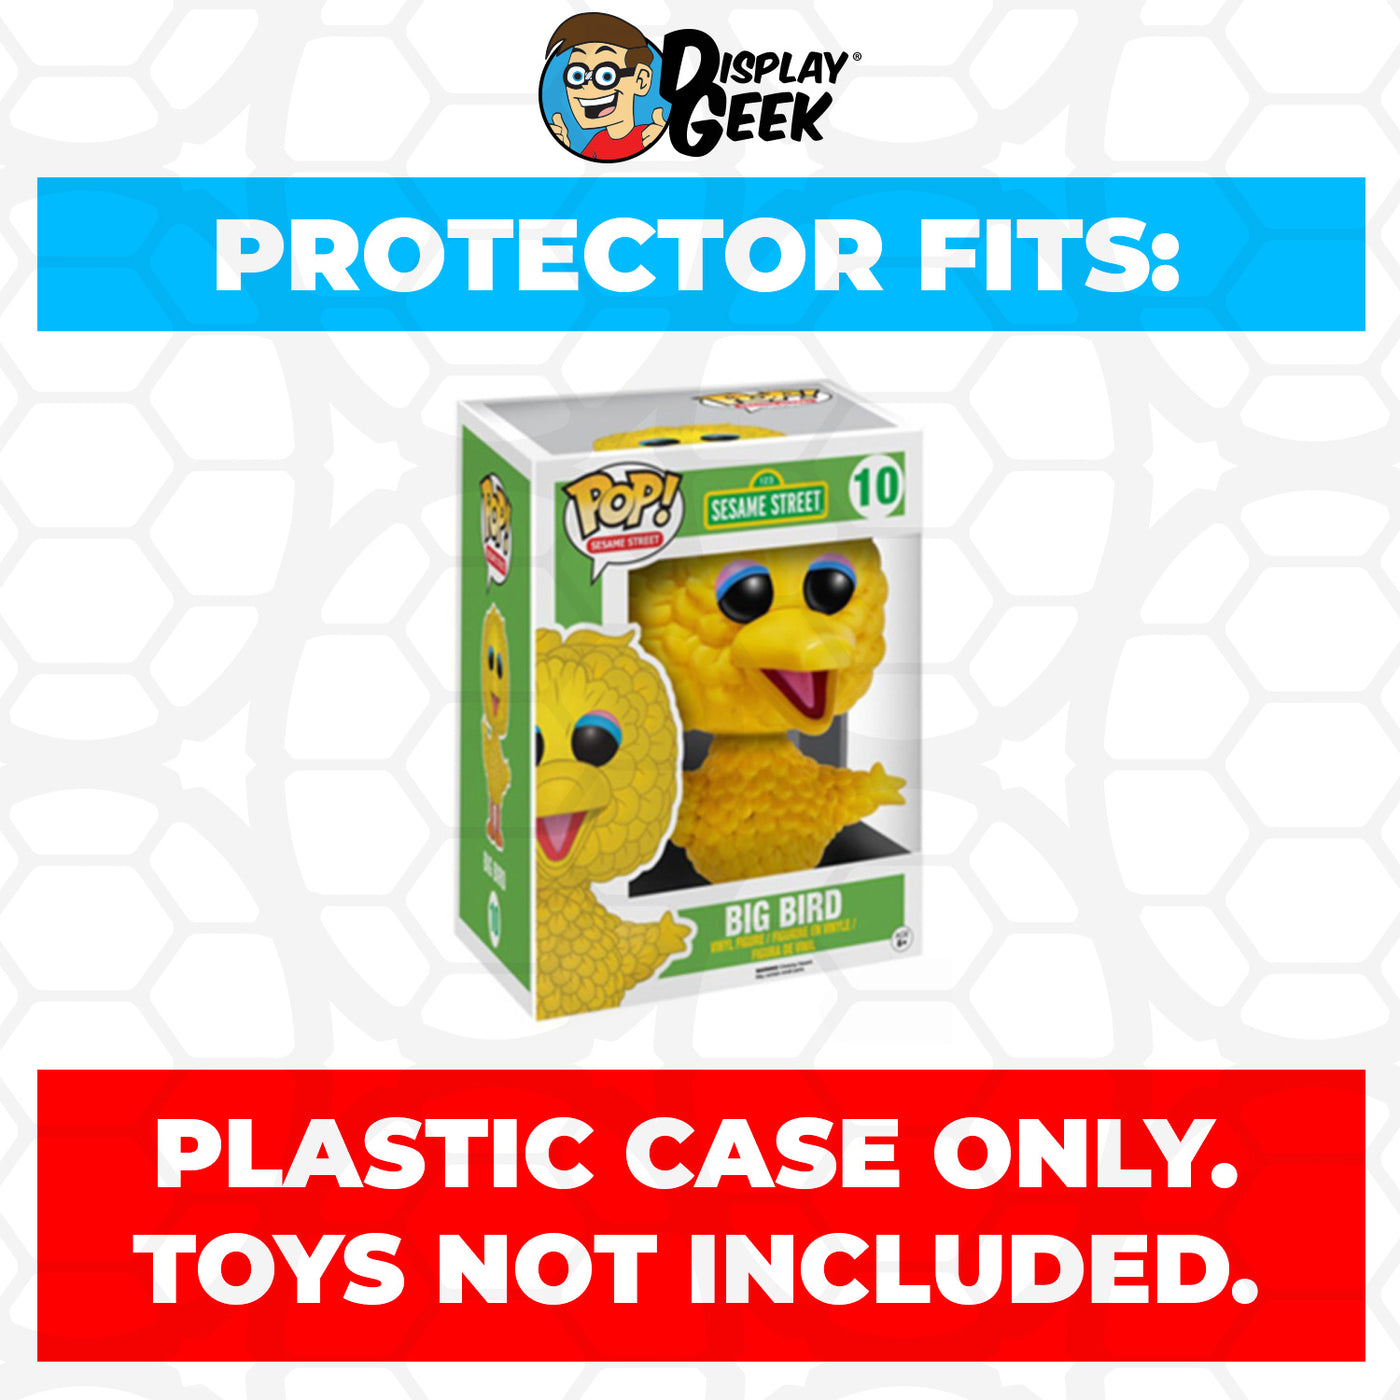 Pop Protector for 6 inch Big Bird #10 Super Funko Pop on The Protector Guide App by Display Geek